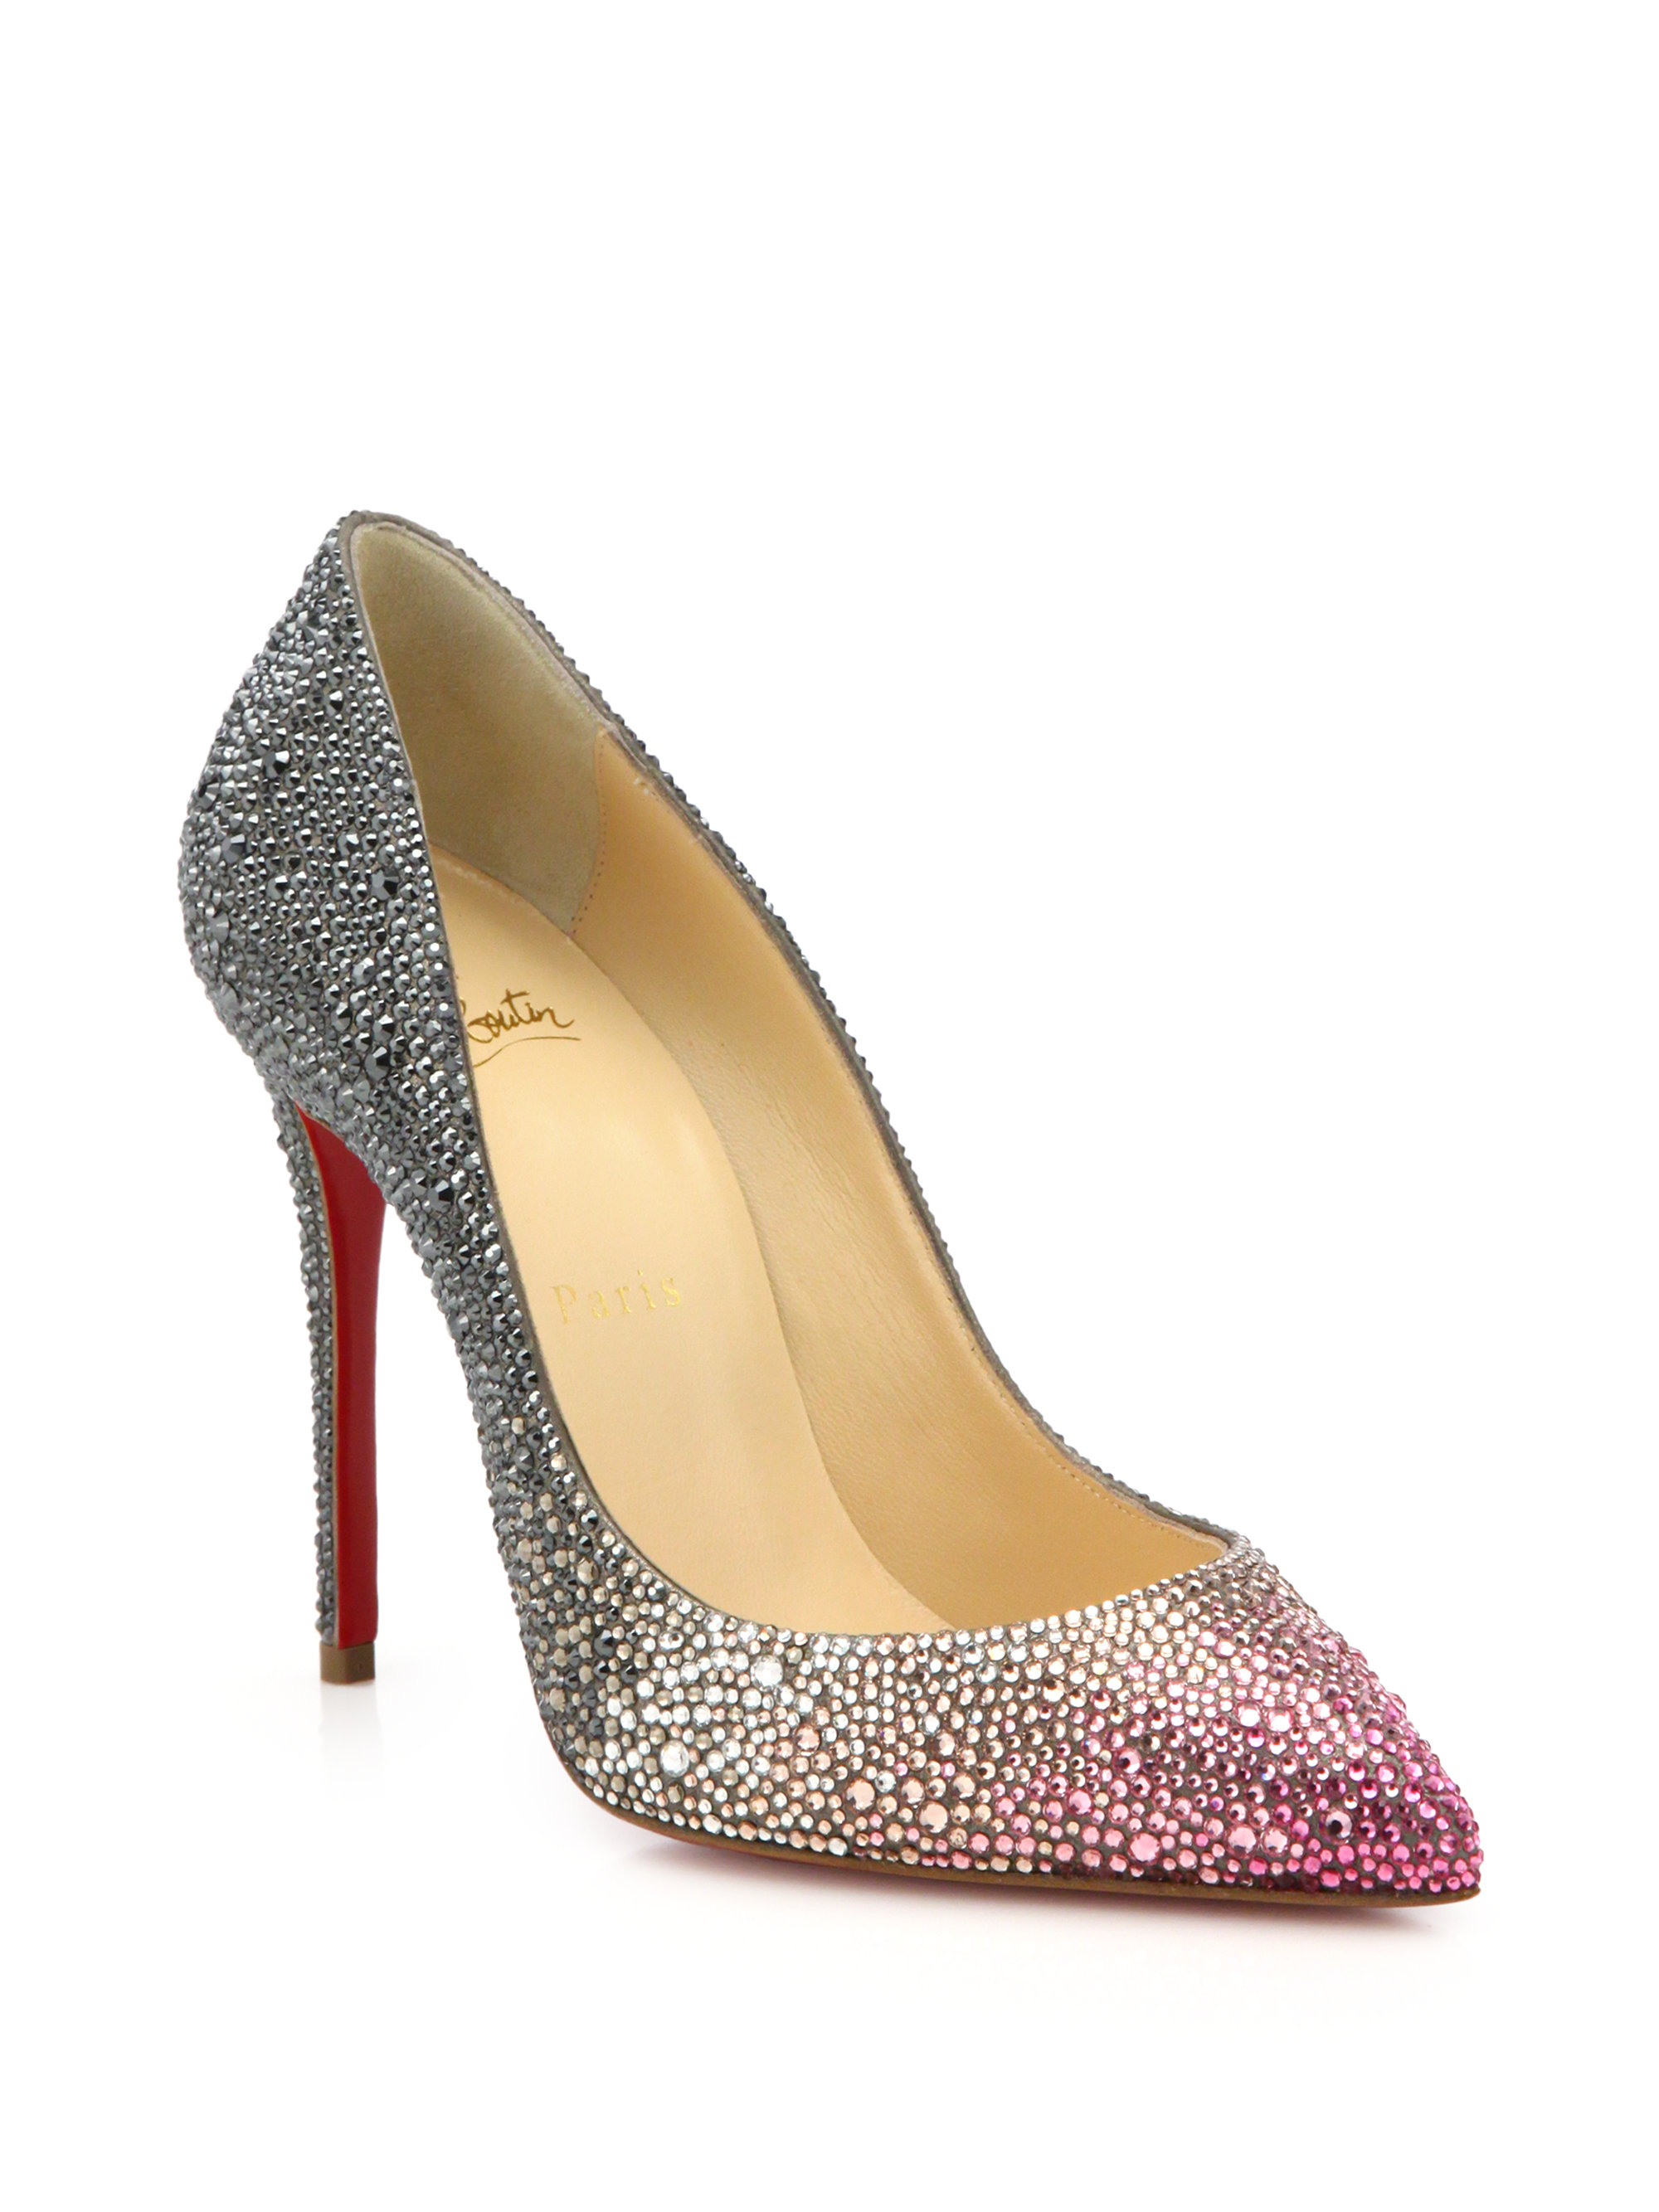 christian louboutin pigalle crystal encrusted stiletto pumps